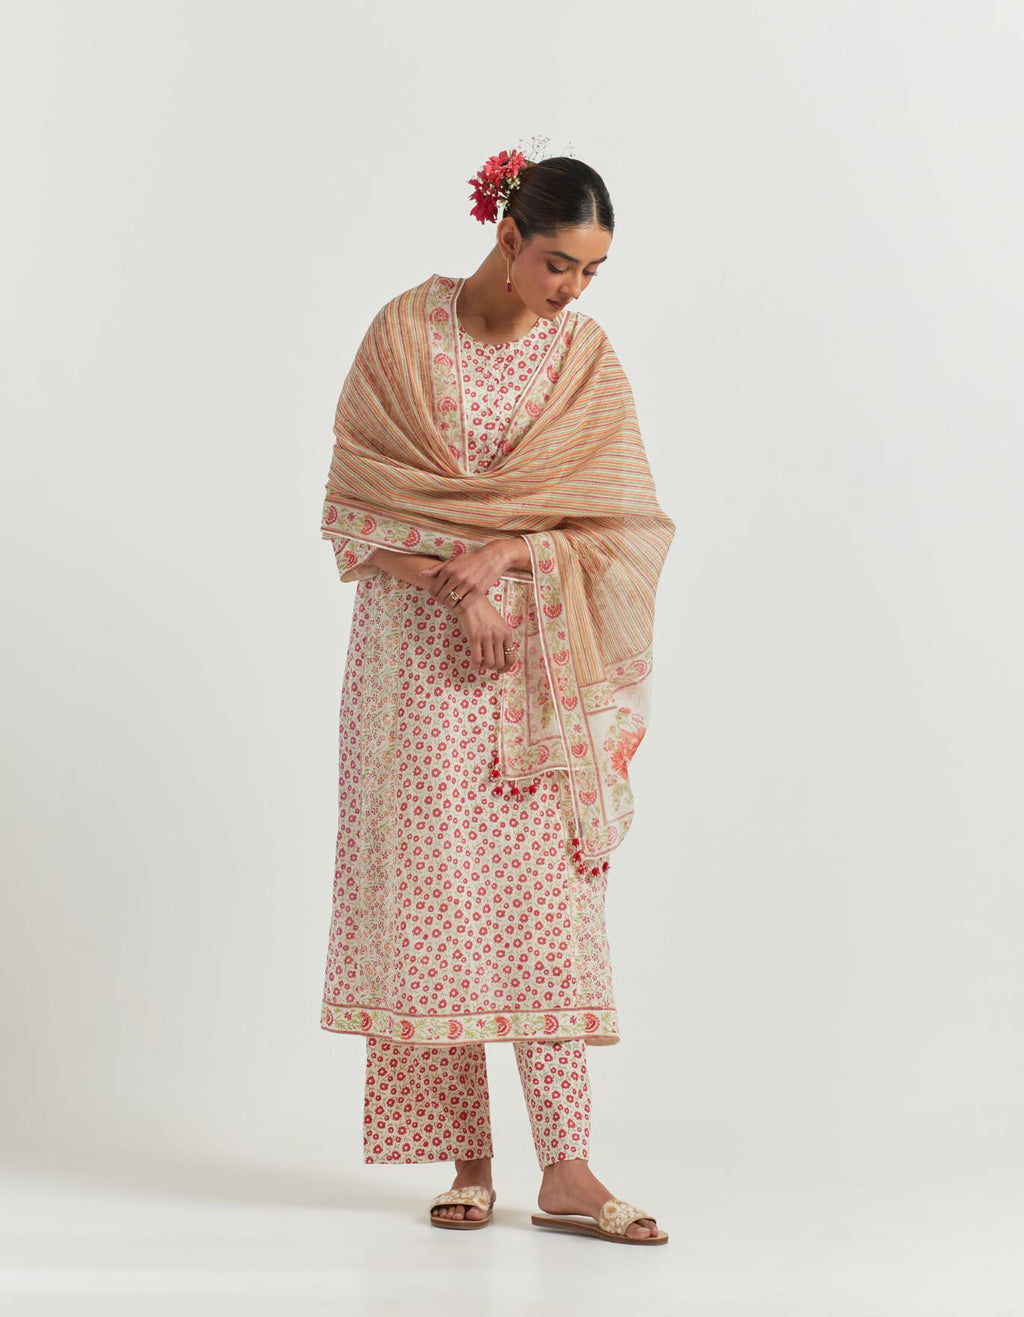 Multi colored cotton hand-block printed kurta set with multi-print panels, highlighted with off white ladder lace detailing at side panels.